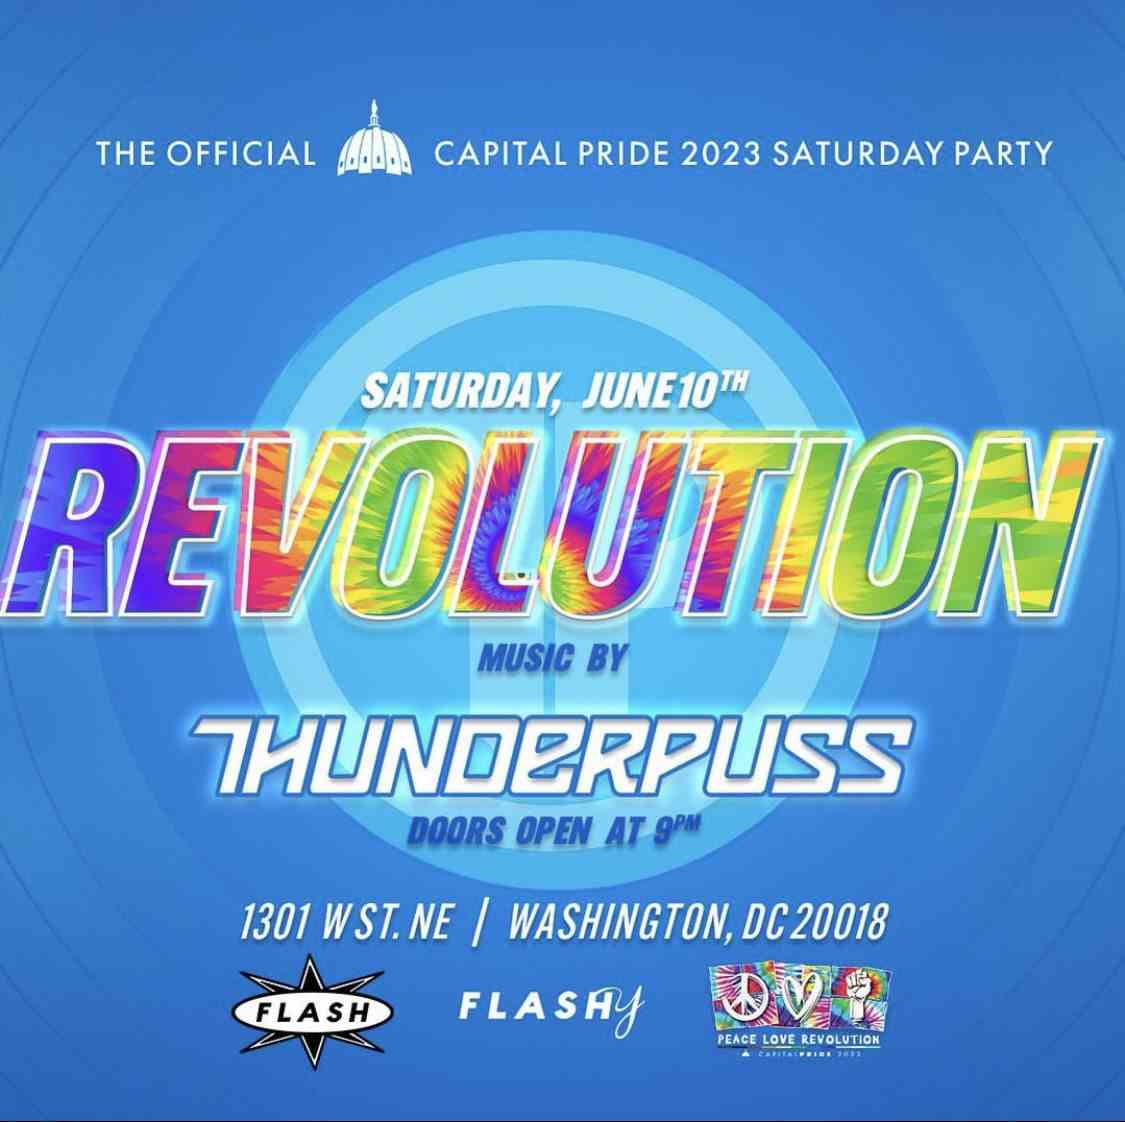 Revolution! The Official Capital Pride Saturday Party event flyer